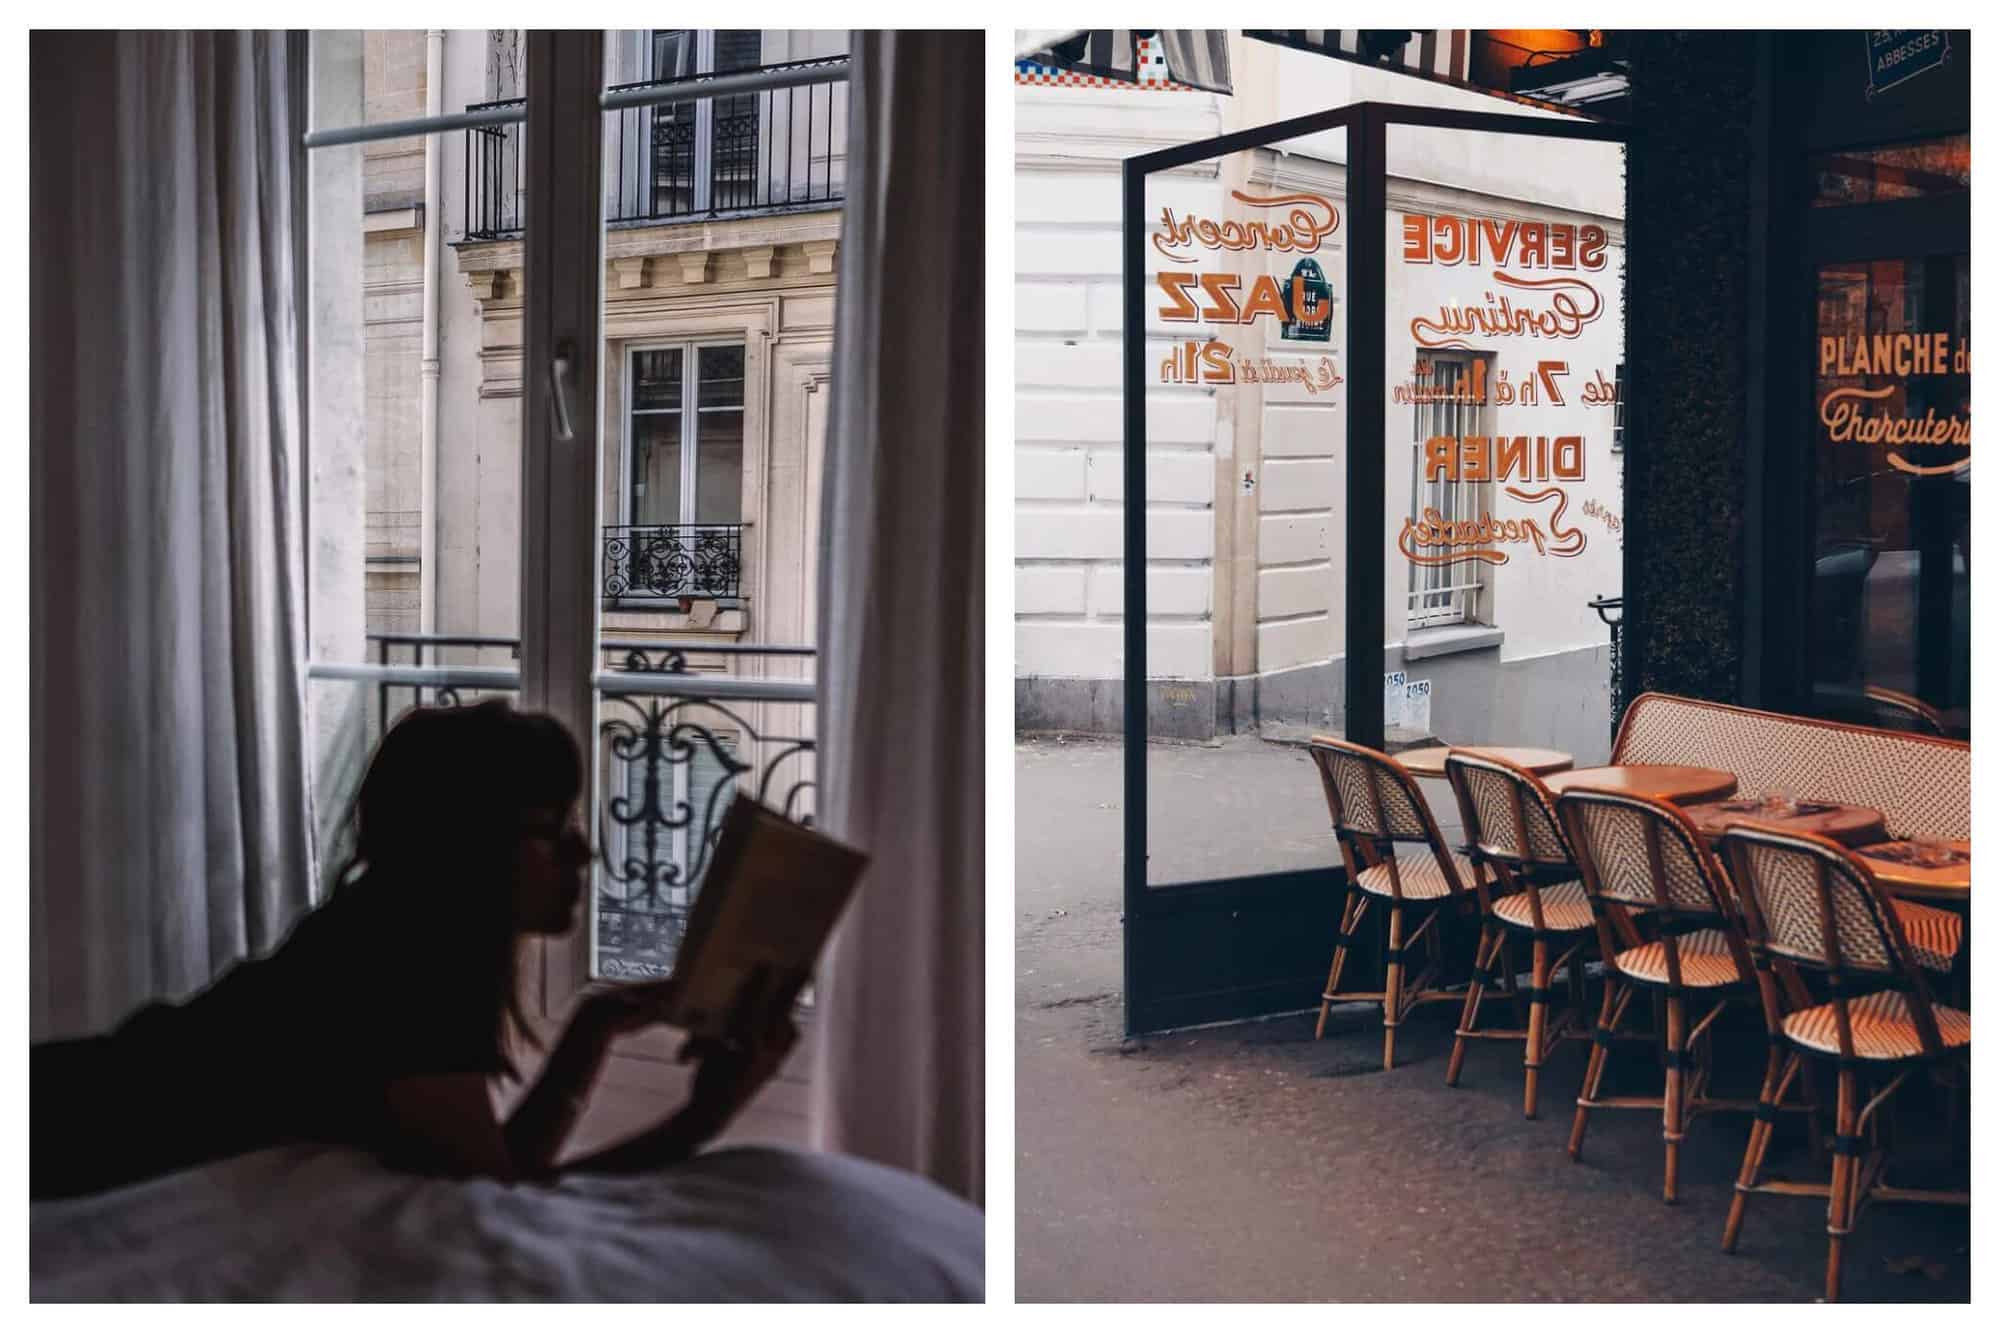 Left: the interior of a Parisian apartment. A woman is laying on her stomach on a bed and holding a book that she is reading. Outside the window another Parisian apartment building is visible. Right: the exterior of a café in Paris. There are several empty tables and chairs visible. A protective glass wall with food specials written on it in orange is to the left.